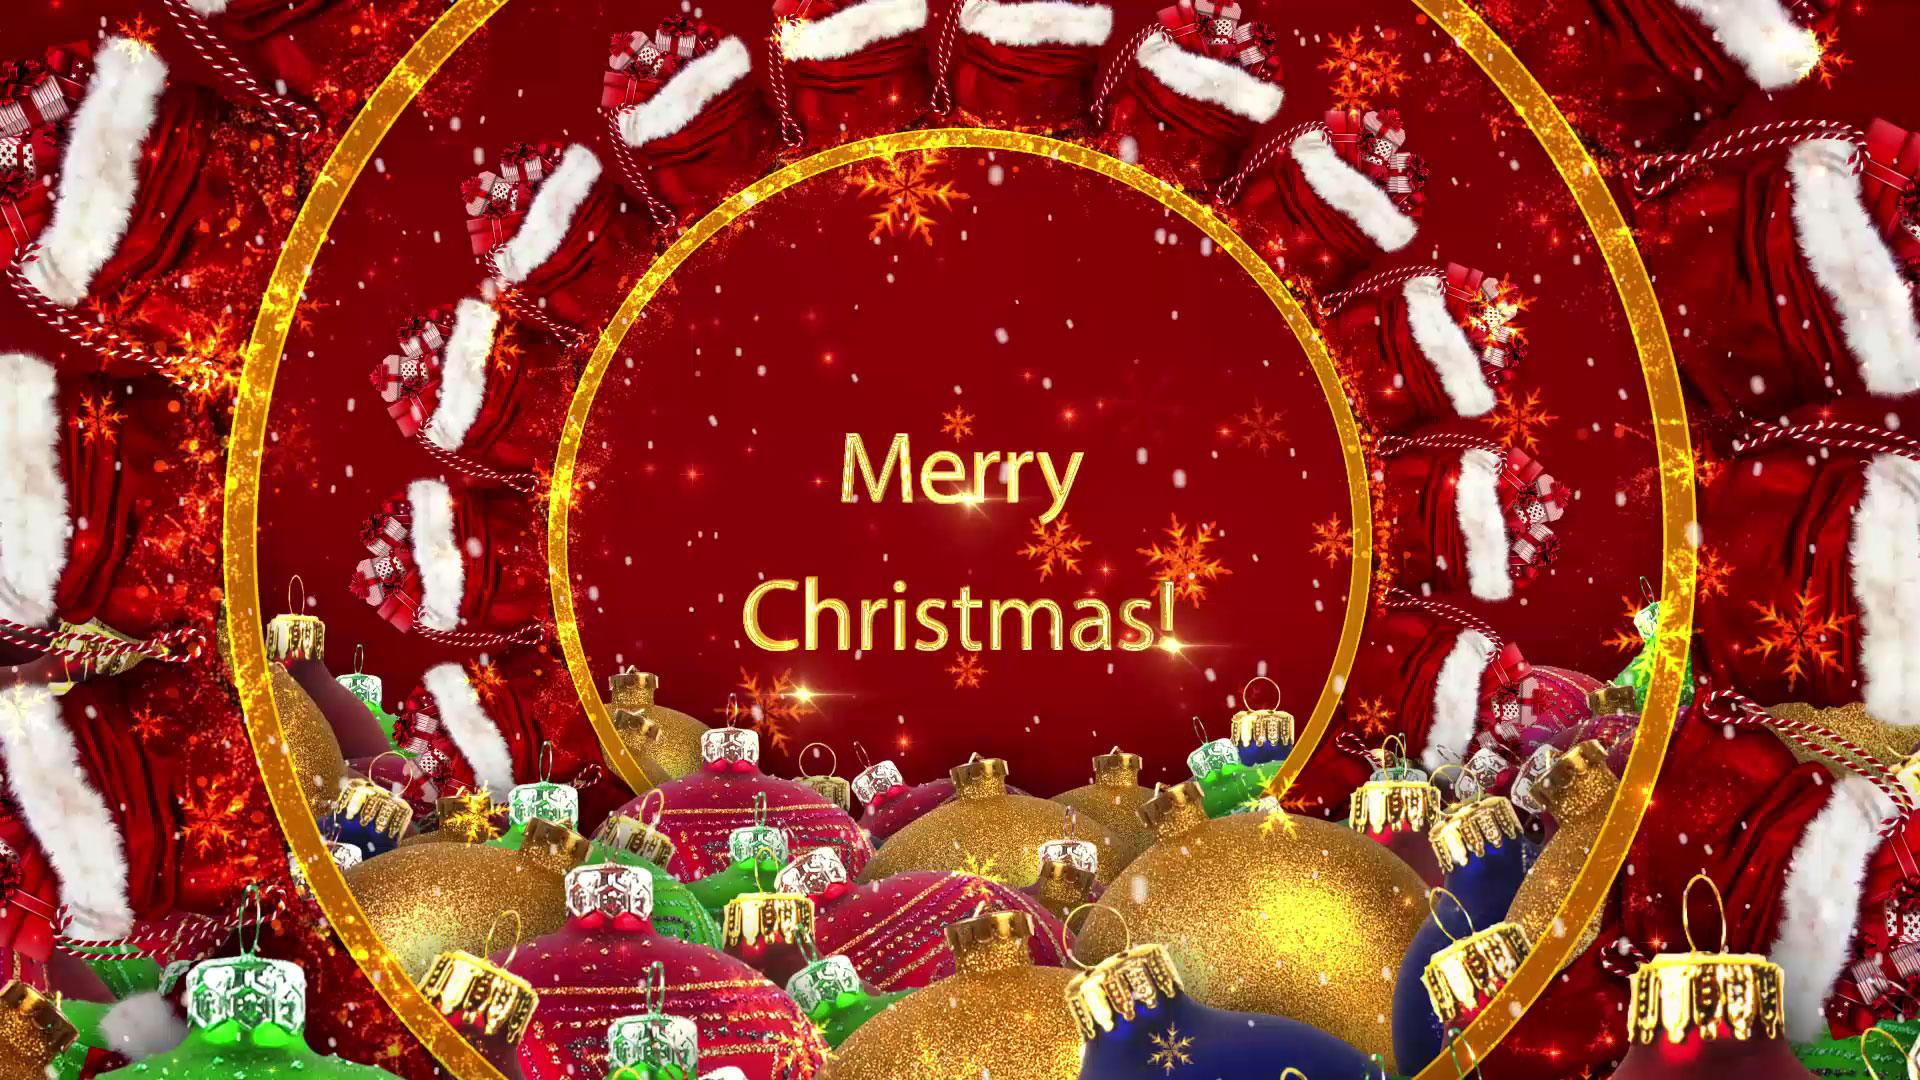 Merry Christmas Wishes 2022 | Happy New Year 2022 Greetings | All Design  Creative